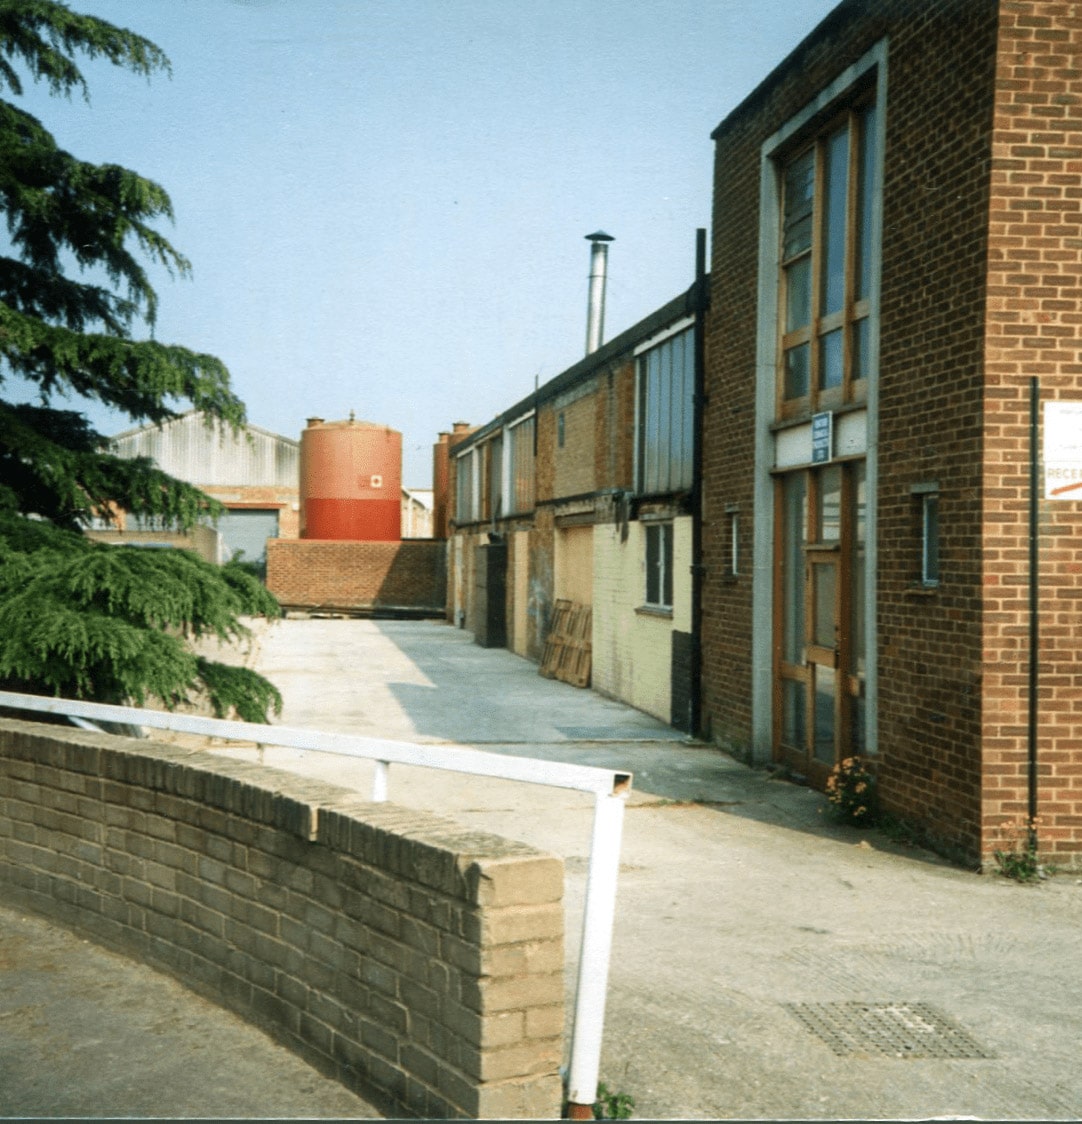 Clydebridge Chemicals Ltd in the 1980's